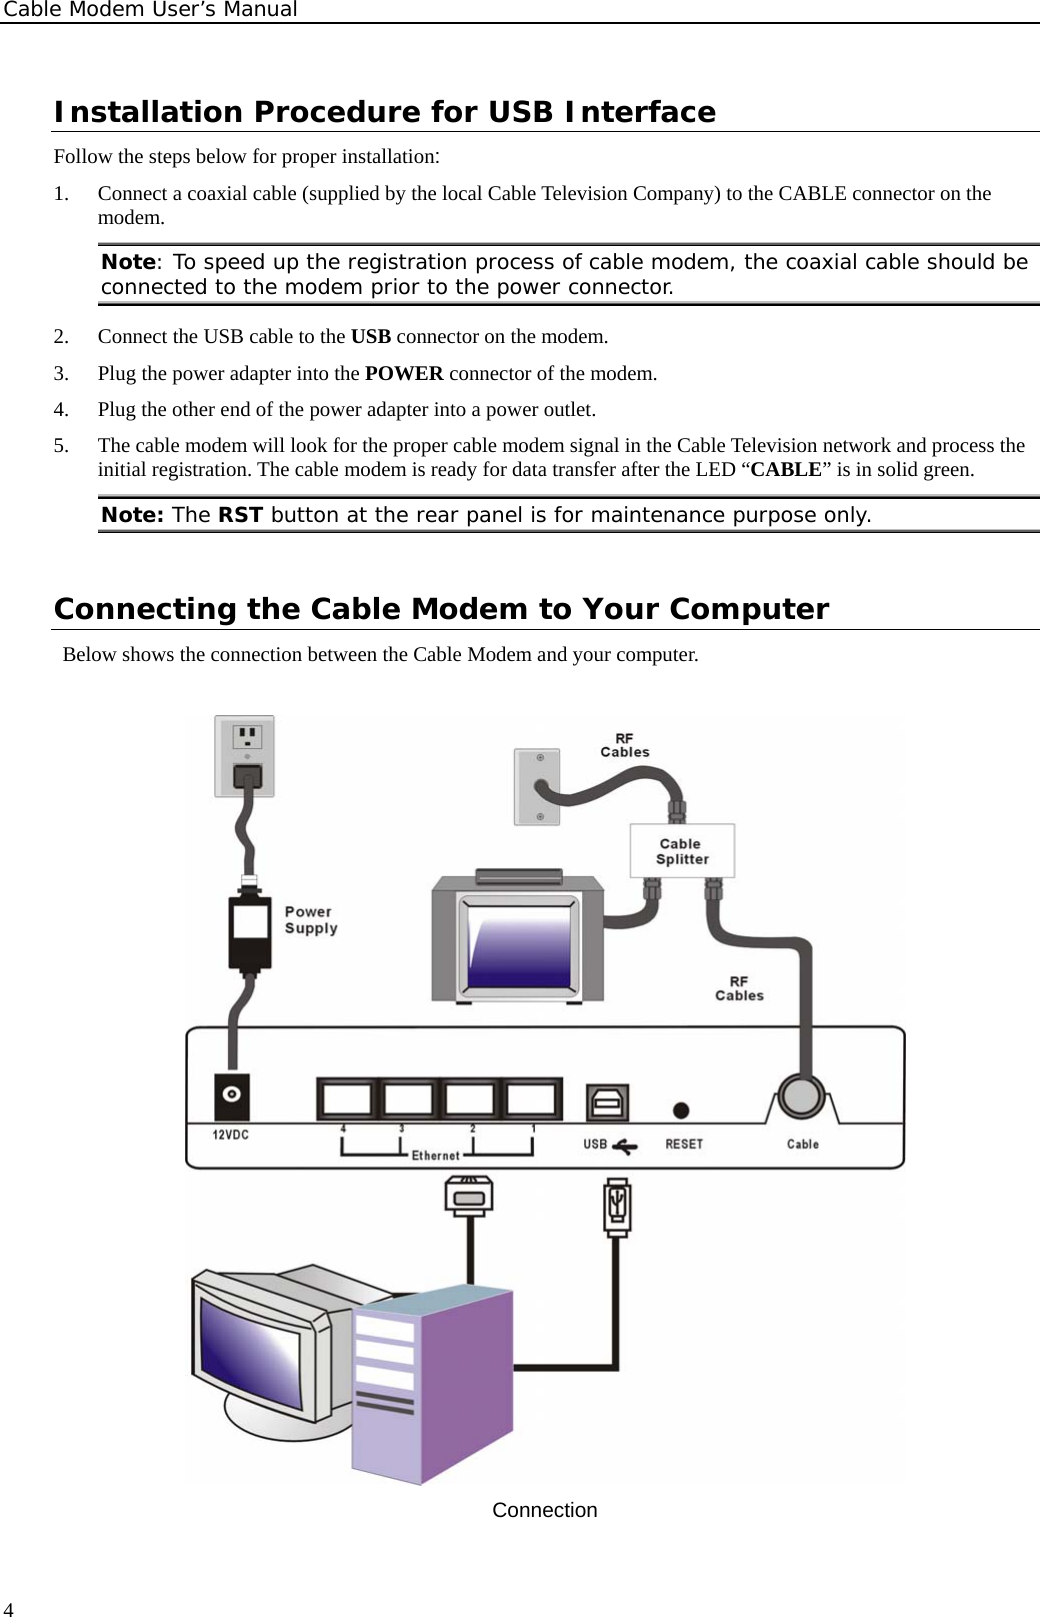 Cable Modem User’s Manual Installation Procedure for USB Interface Follow the steps below for proper installation: 1.  Connect a coaxial cable (supplied by the local Cable Television Company) to the CABLE connector on the modem.  Note: To speed up the registration process of cable modem, the coaxial cable should be connected to the modem prior to the power connector.  2.  Connect the USB cable to the USB connector on the modem. 3.  Plug the power adapter into the POWER connector of the modem. 4.  Plug the other end of the power adapter into a power outlet. 5.  The cable modem will look for the proper cable modem signal in the Cable Television network and process the initial registration. The cable modem is ready for data transfer after the LED “CABLE” is in solid green.   Note: The RST button at the rear panel is for maintenance purpose only.  Connecting the Cable Modem to Your Computer Below shows the connection between the Cable Modem and your computer.     Connection  4